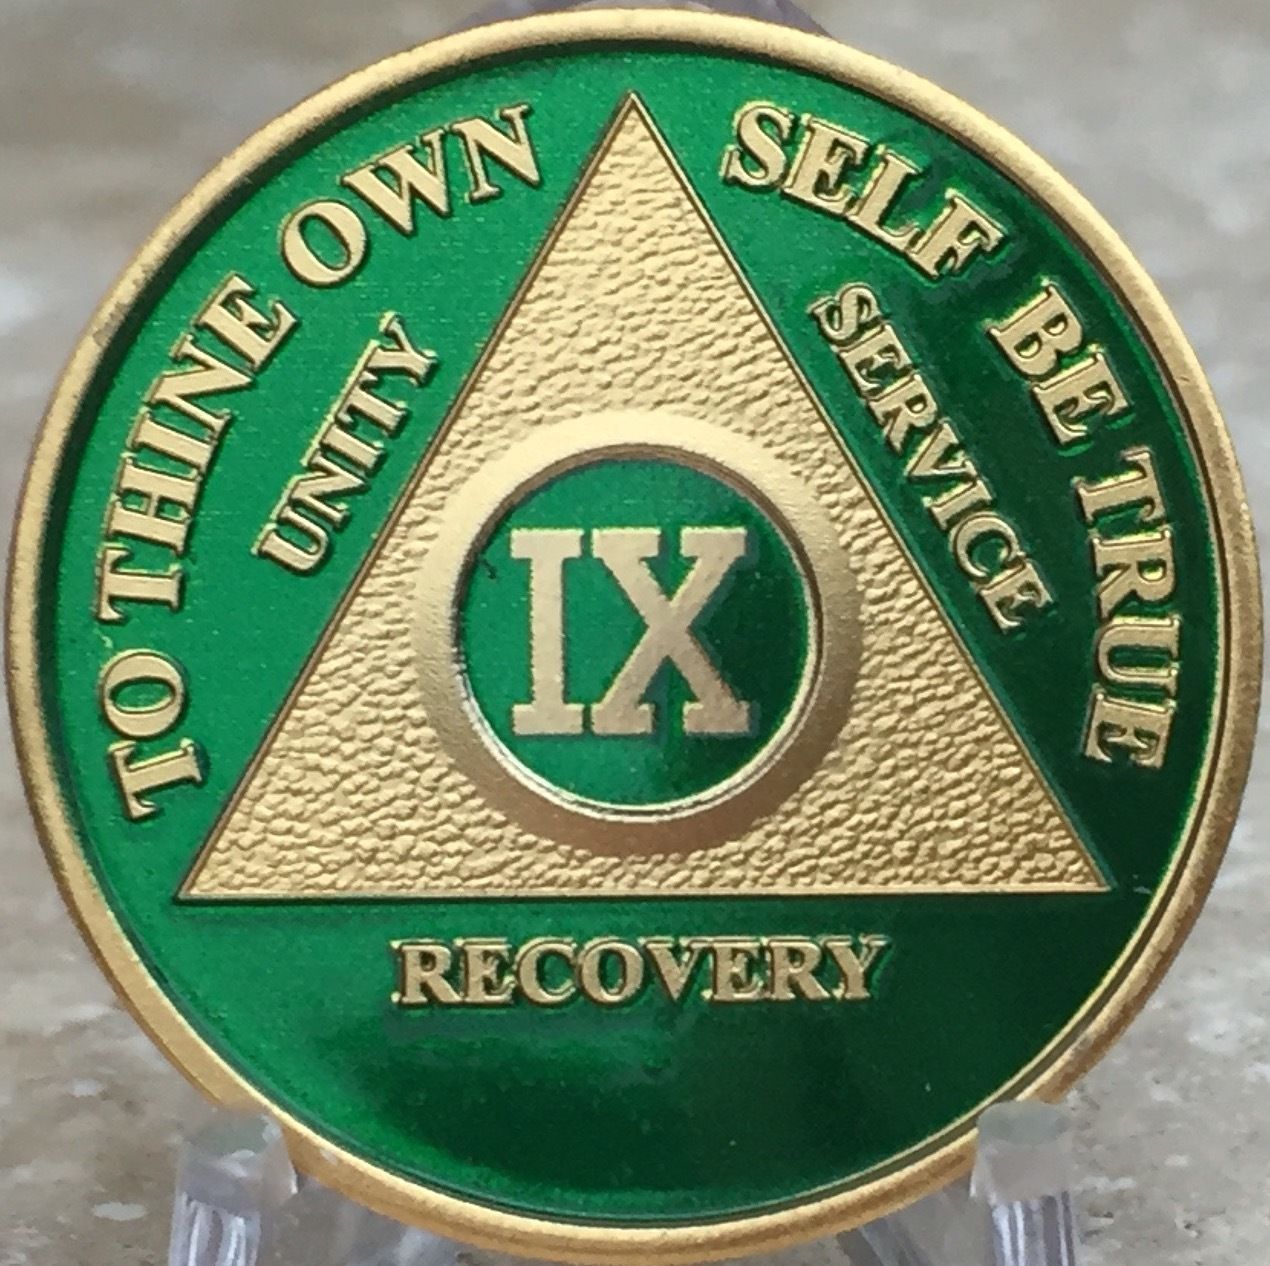 9 Year AA Medallion Green Gold Plated Alcoholics Anonymous Sobriety Chip Coin